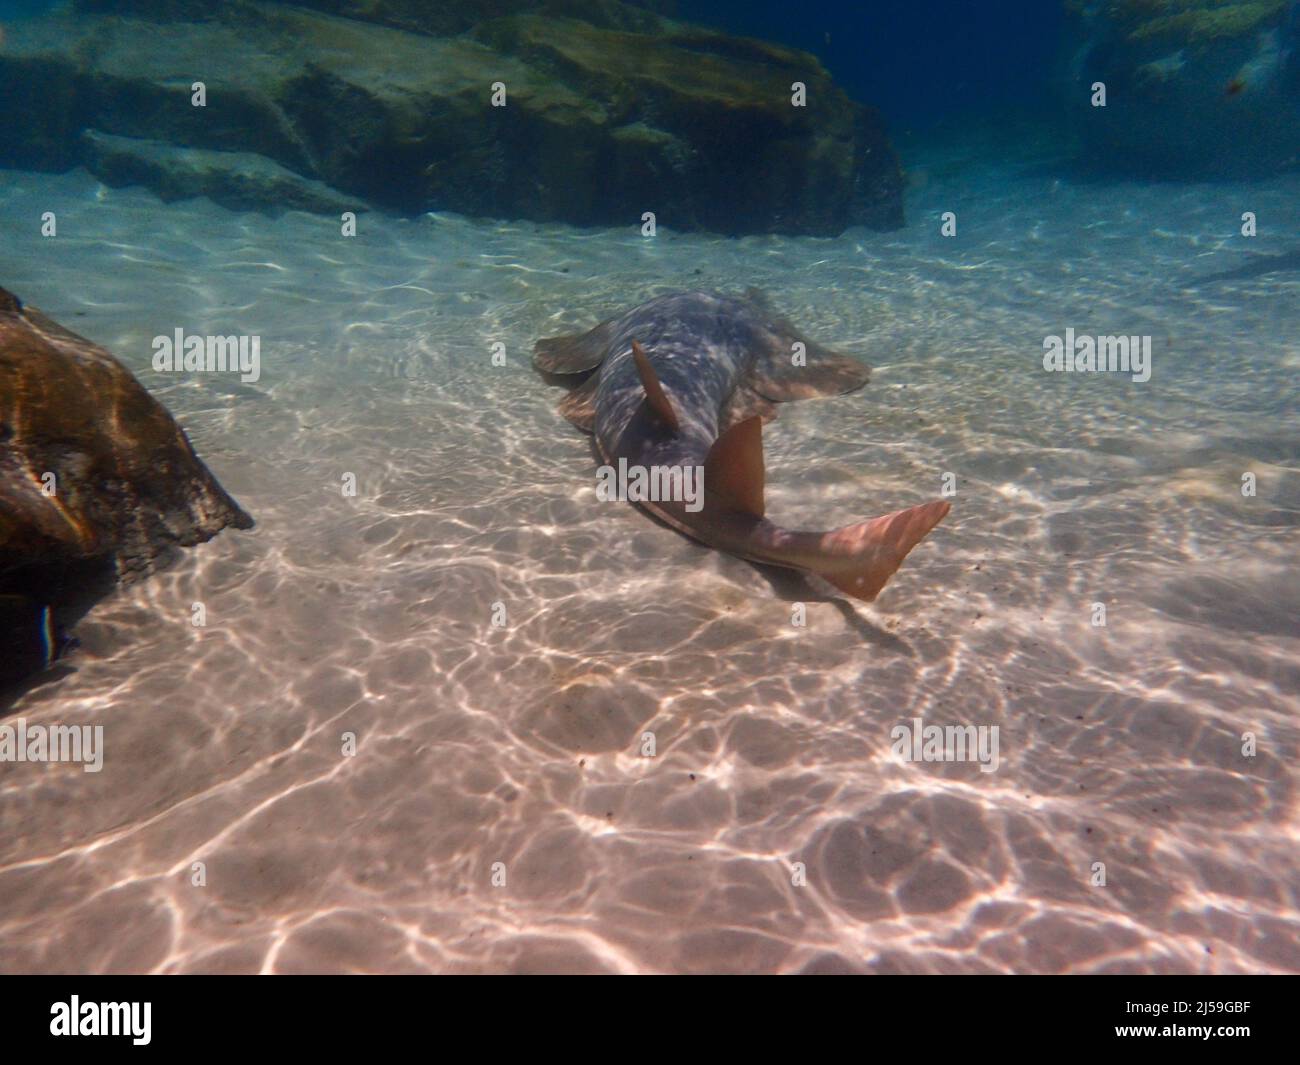 Shovelnose Ray swimming over coral reef, stingray Stock Photo